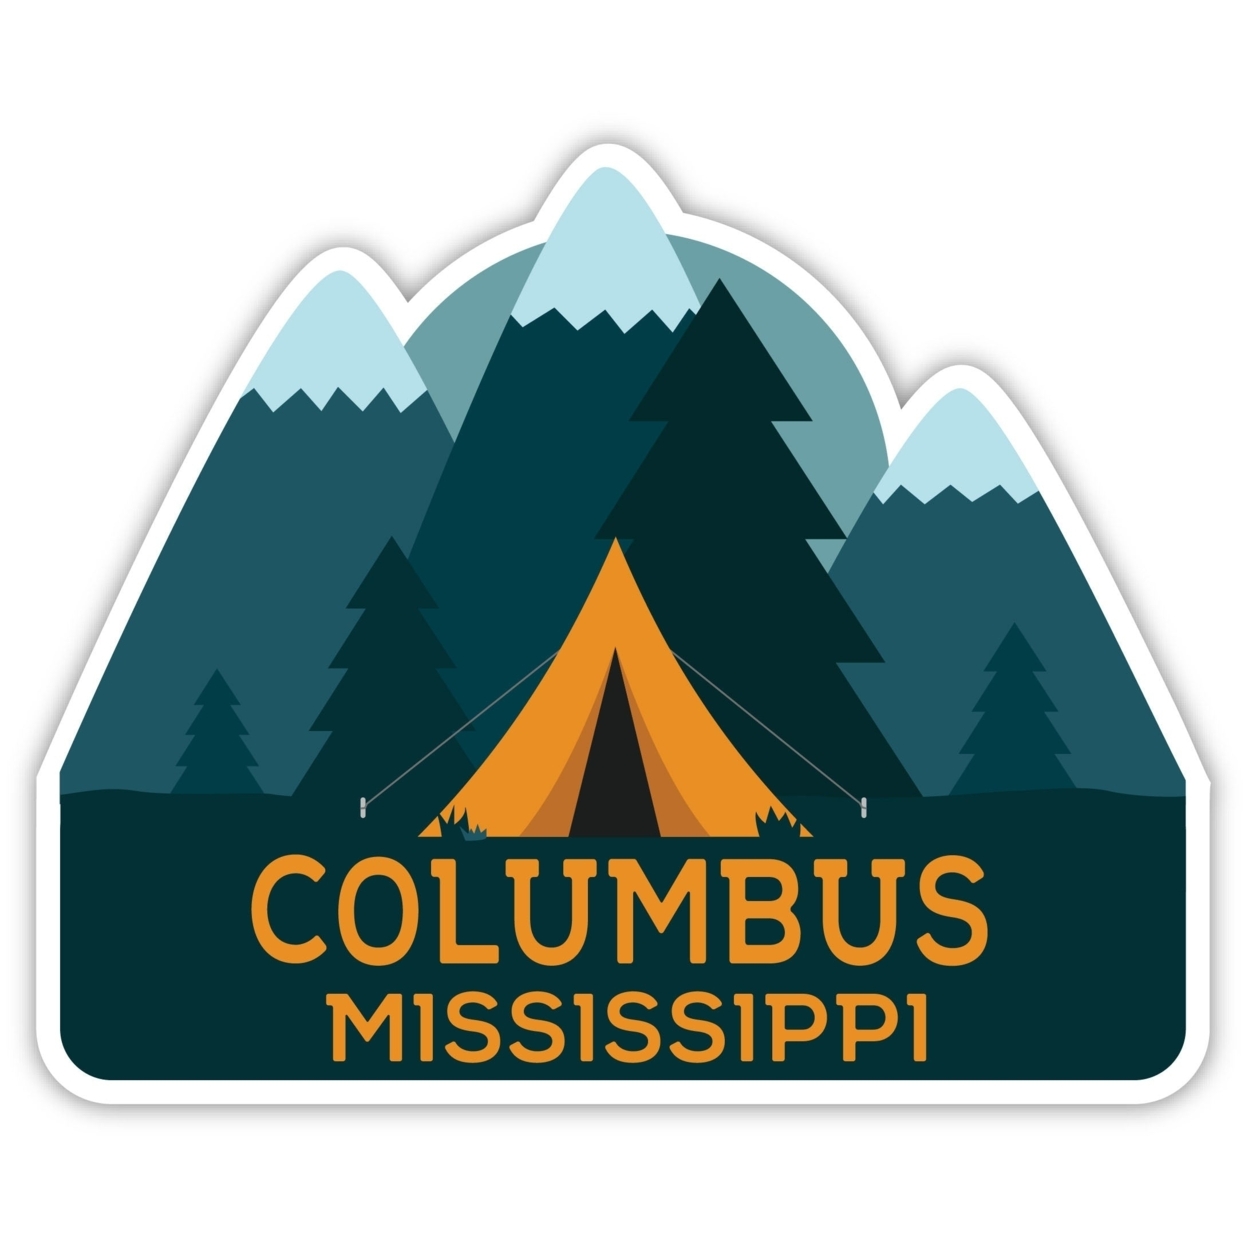 Columbus Mississippi Souvenir Decorative Stickers (Choose Theme And Size) - 4-Pack, 4-Inch, Tent